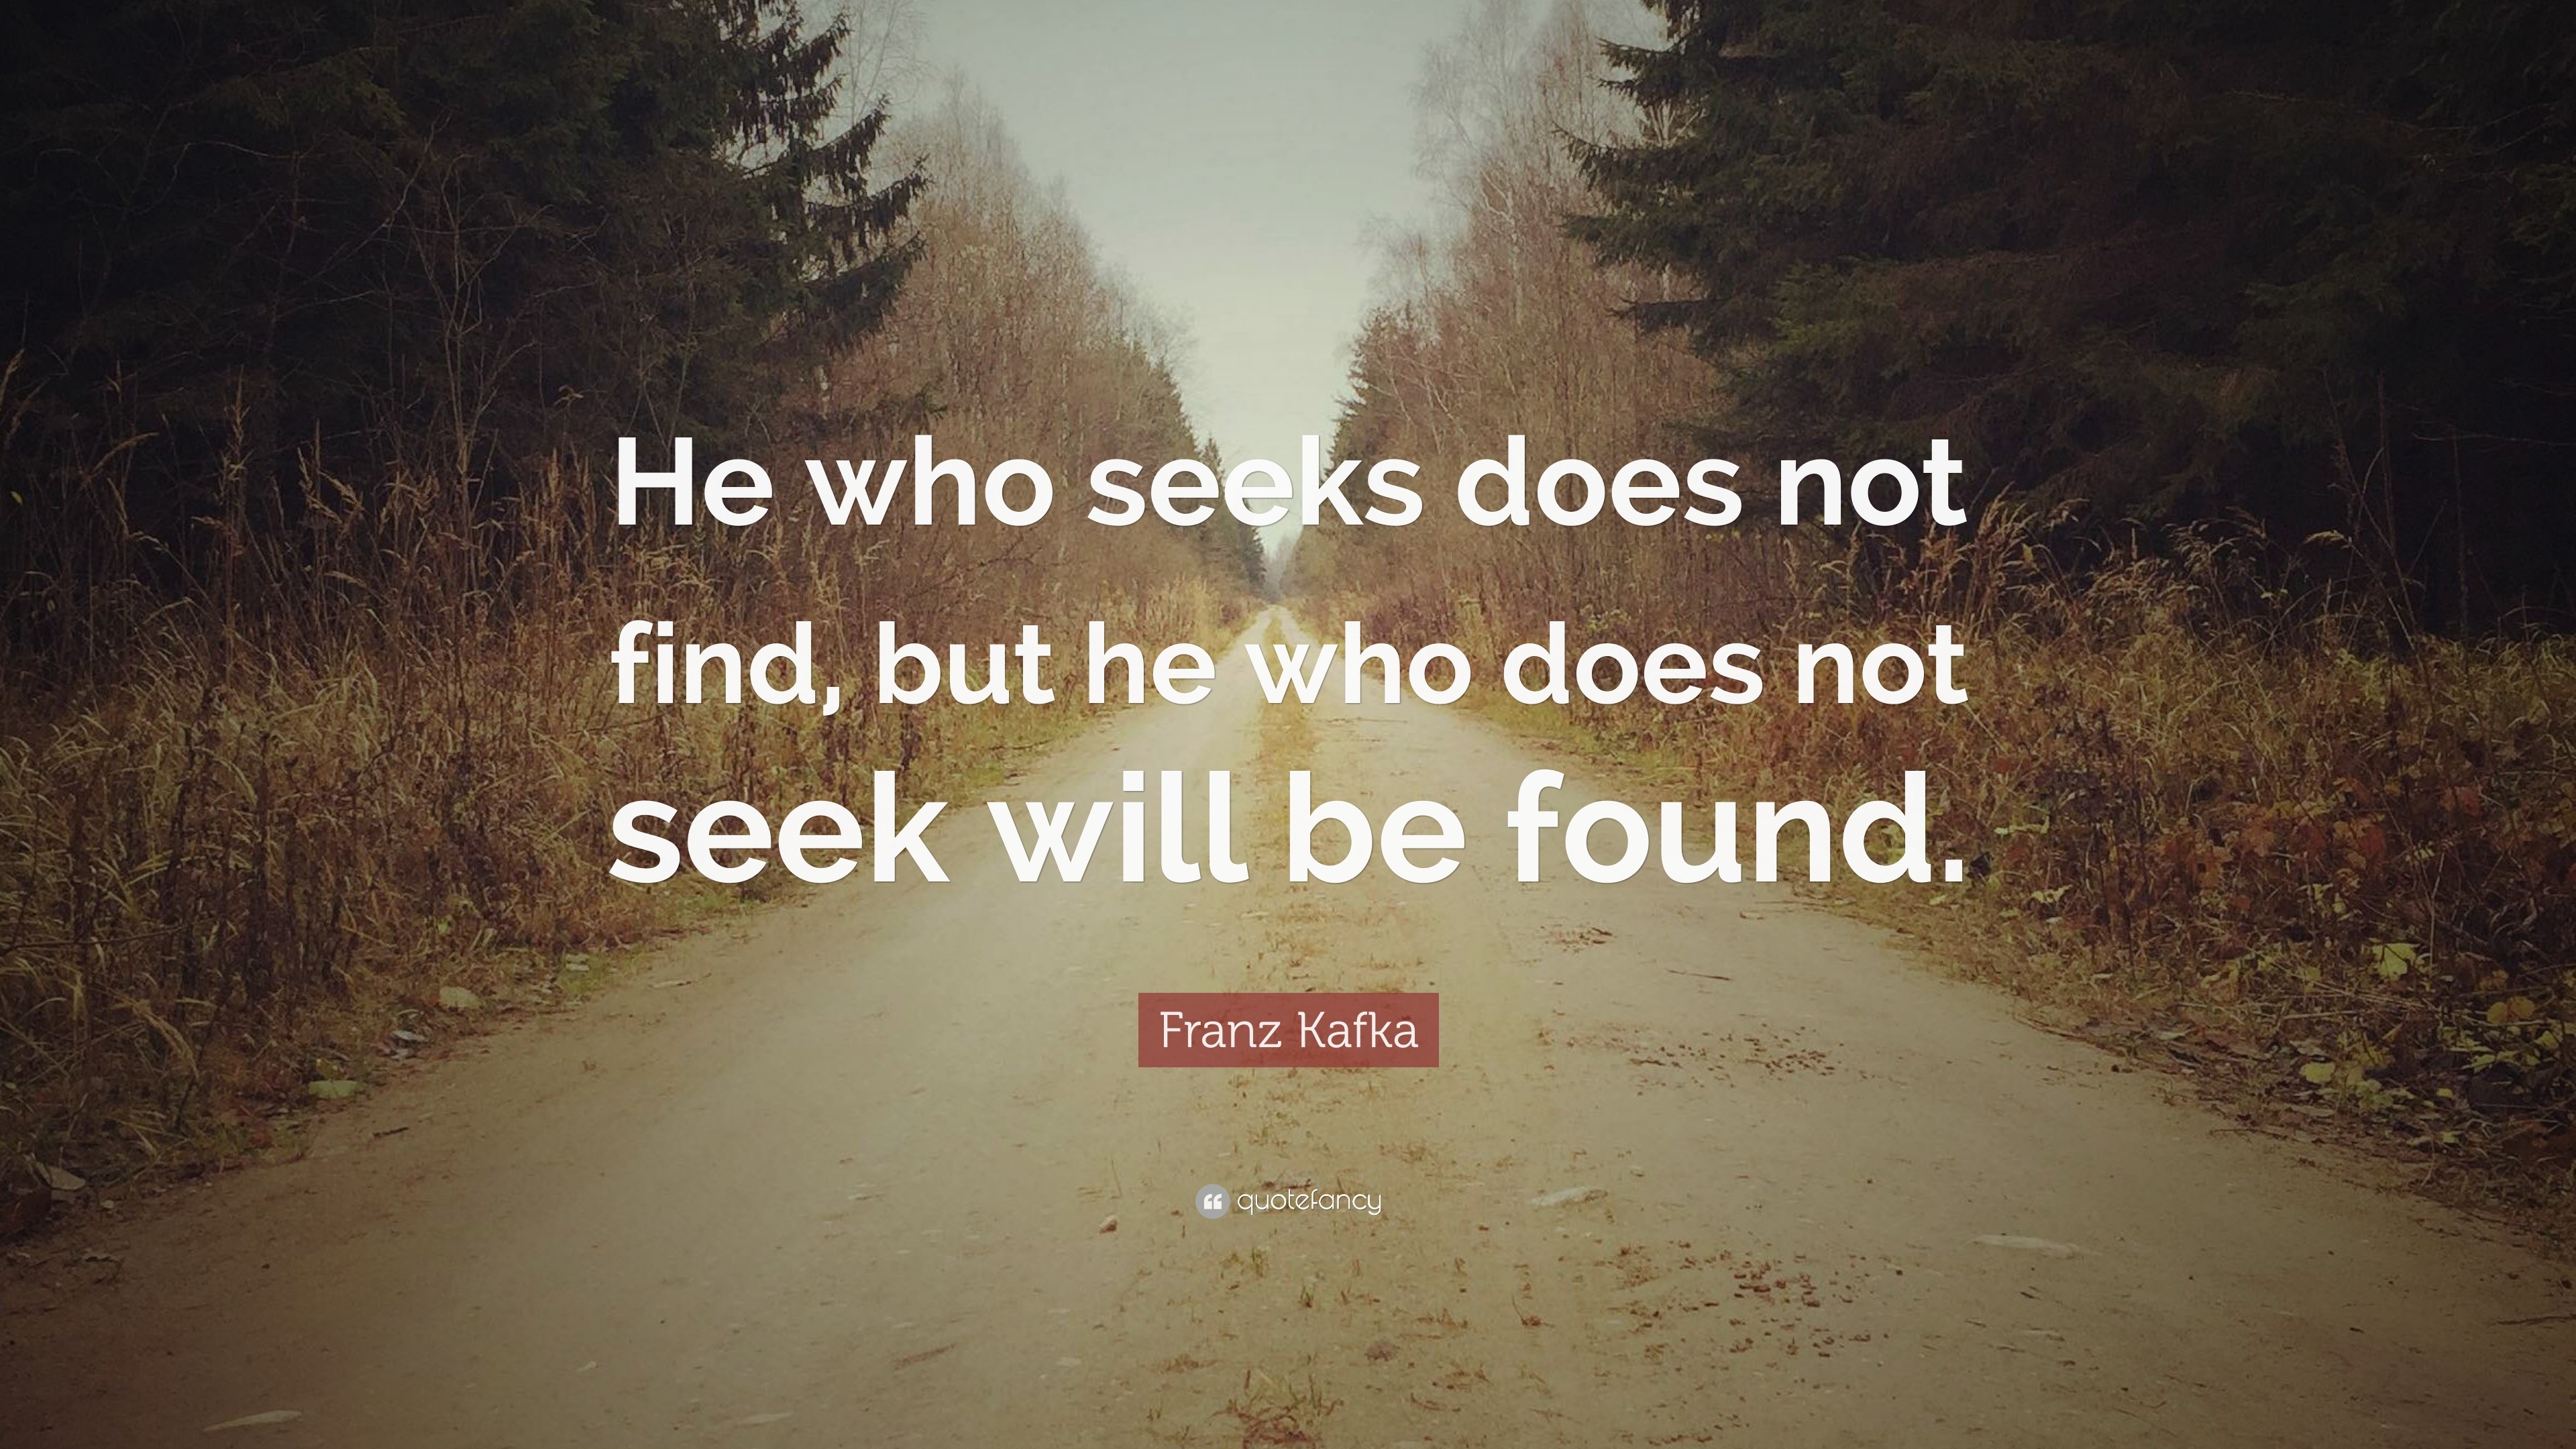 Franz Kafka Quote He Who Seeks Does Not Find But He Who Does Not Seek Will